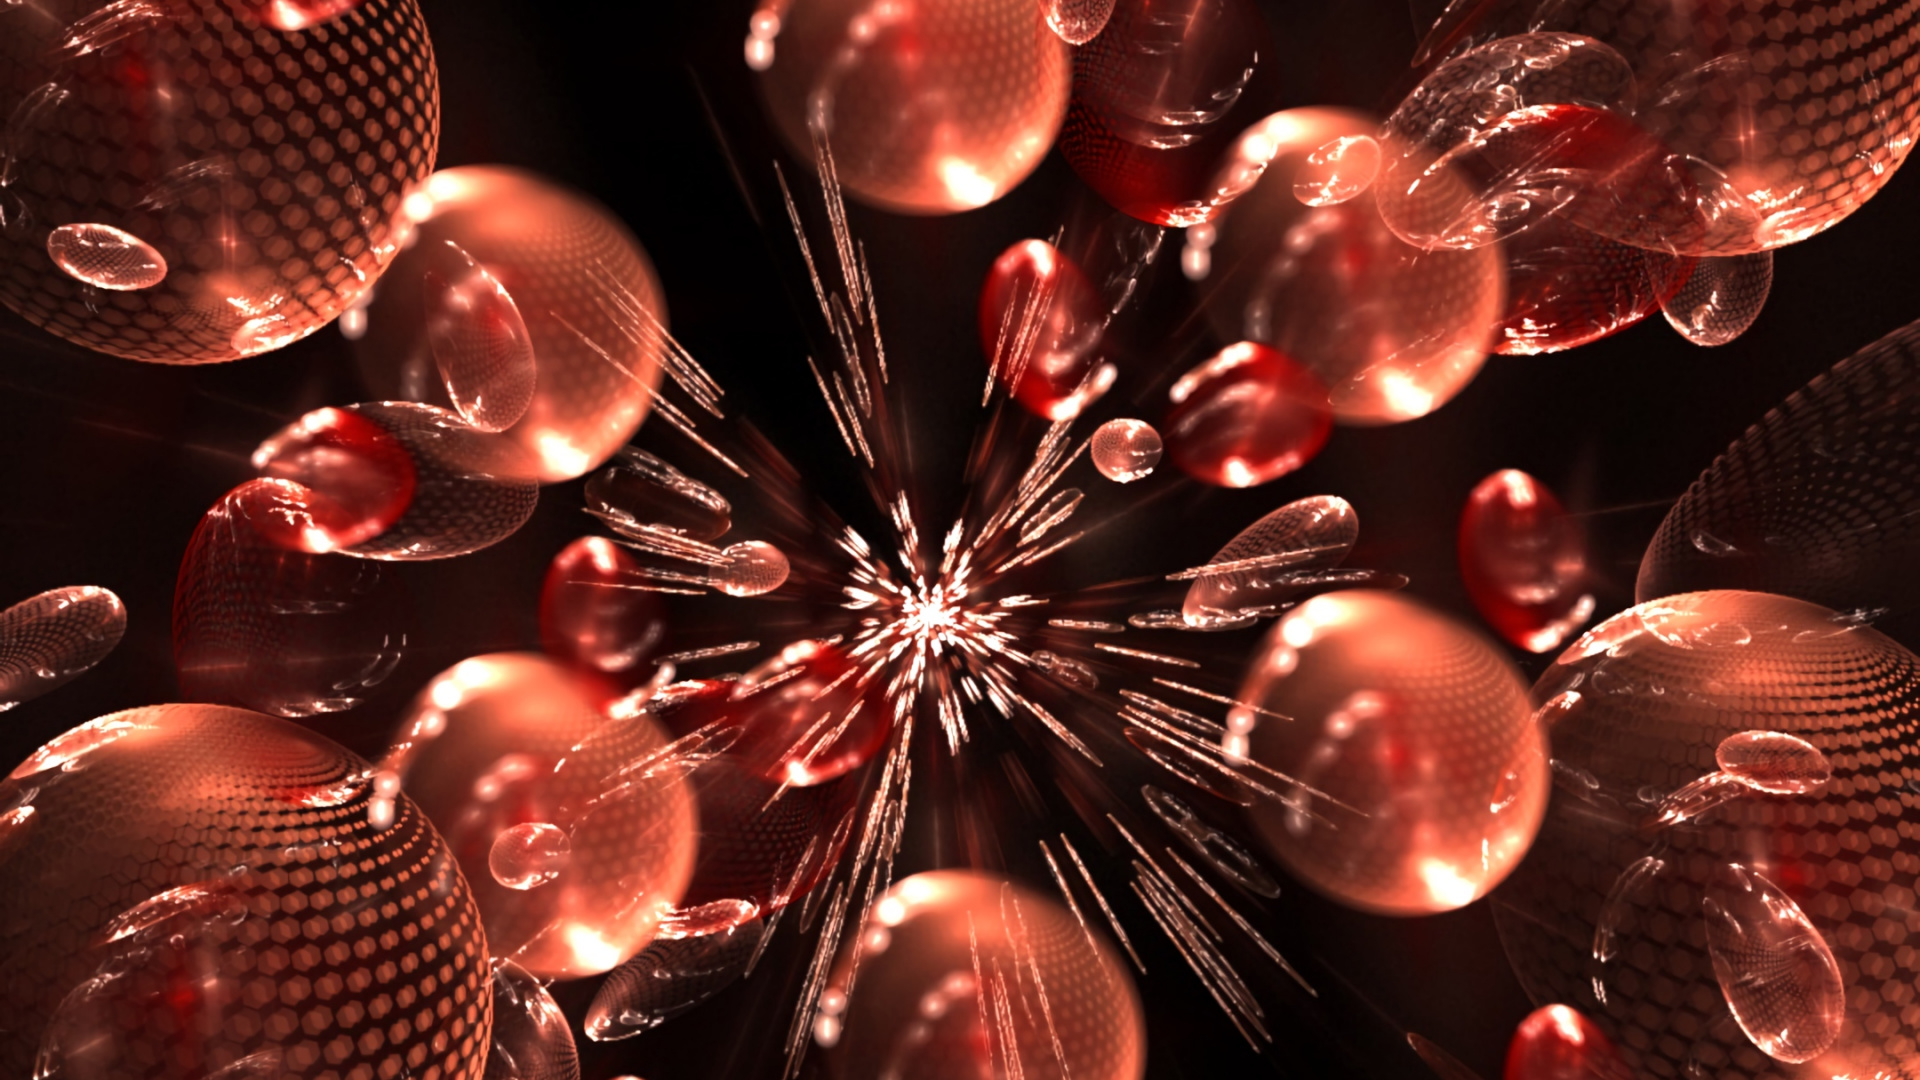 Red and White Light Decor. Wallpaper in 1920x1080 Resolution